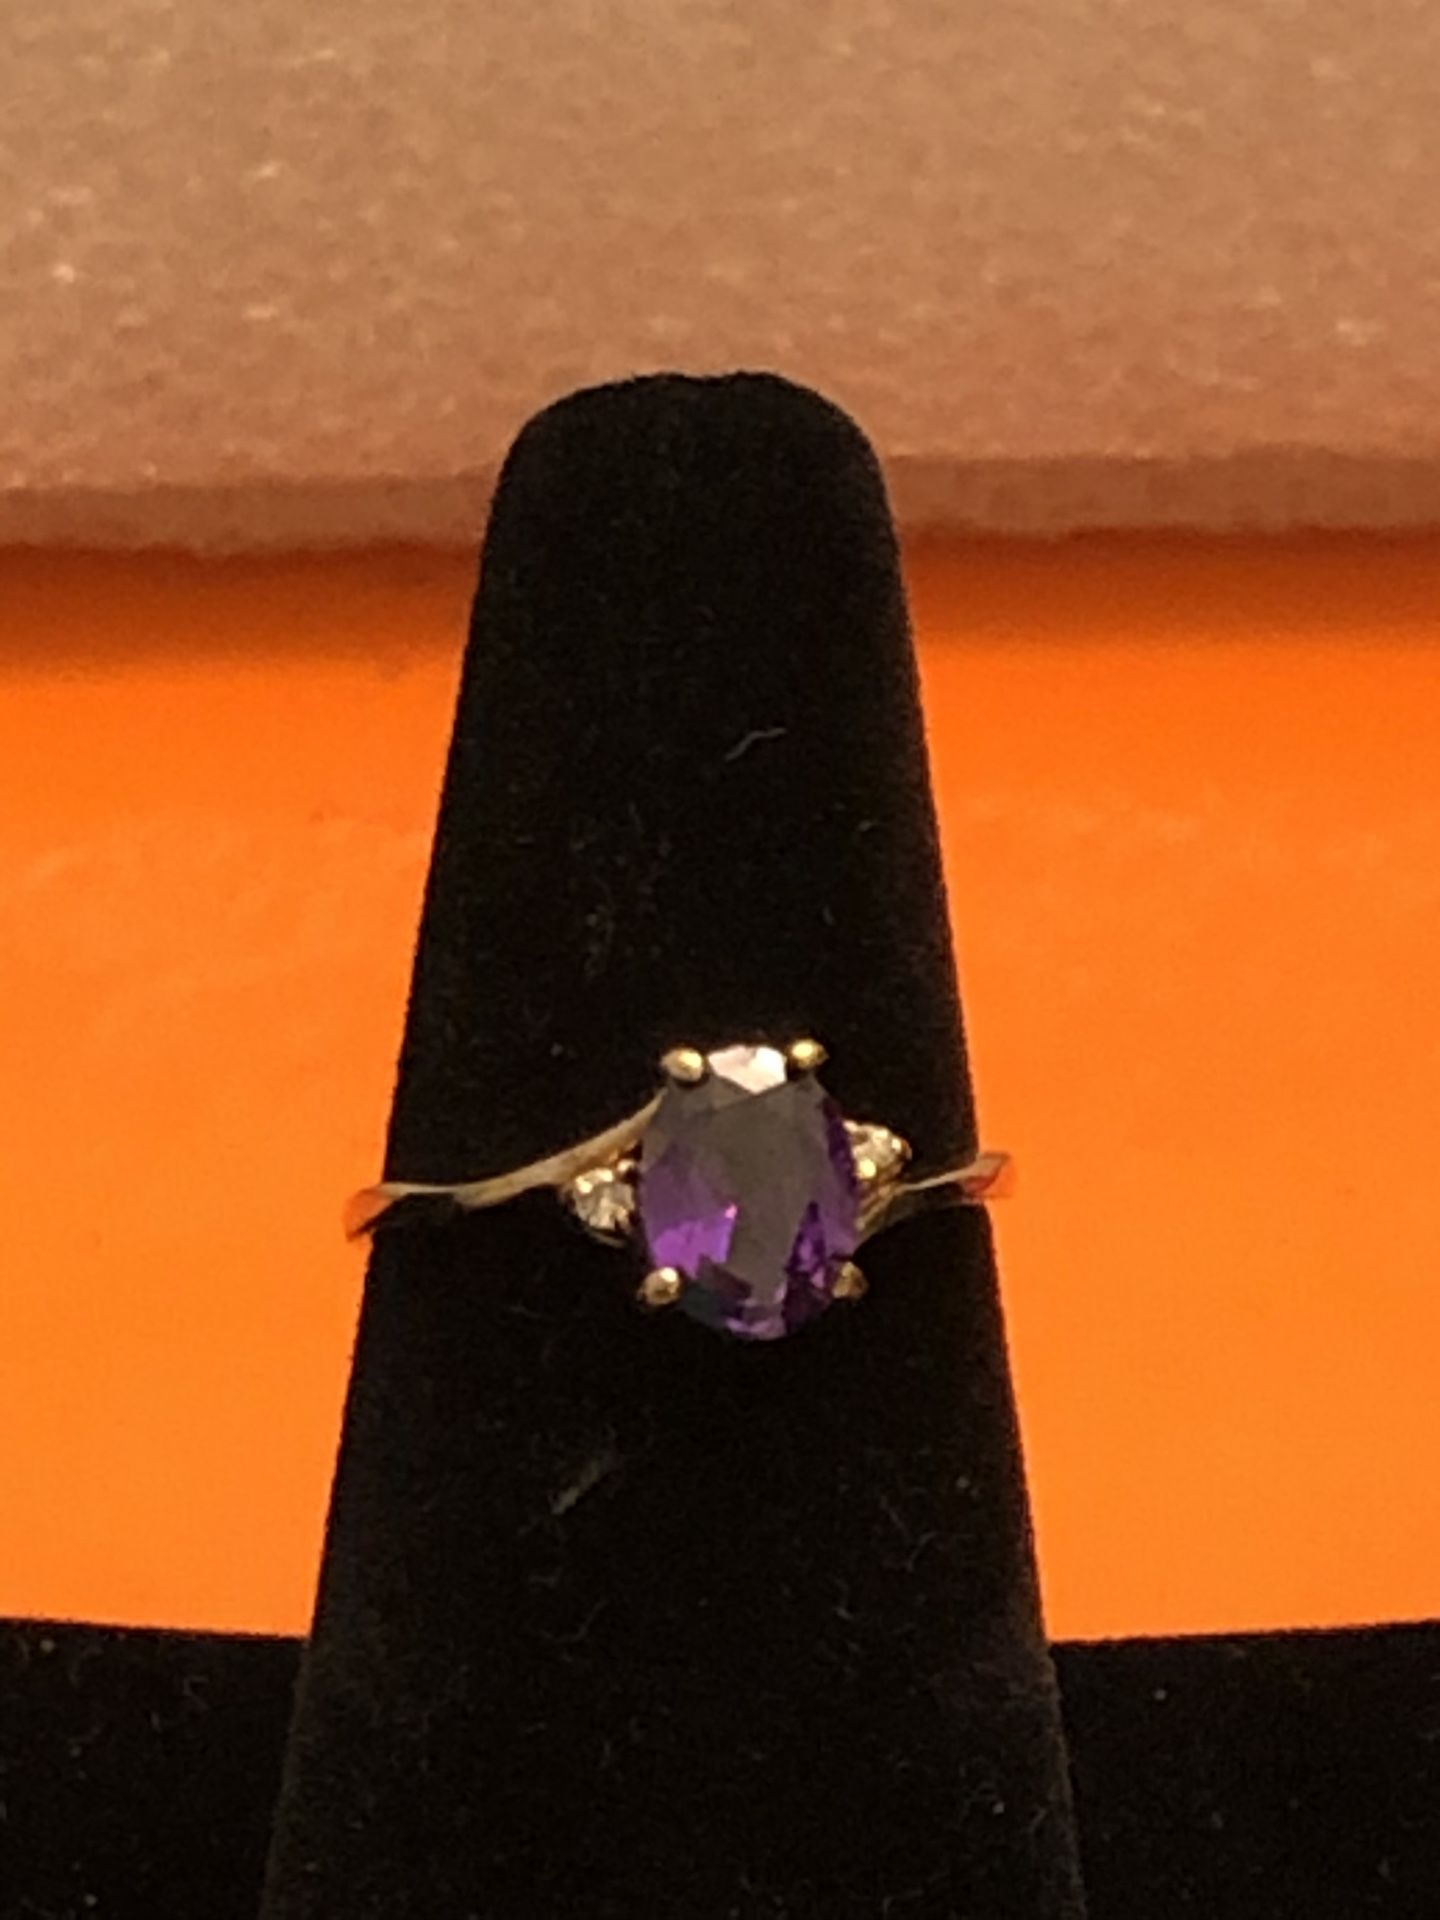 10k gold amethyst &diamond ring,2.17 grams, Size 6.5, please look at all pictures for more details